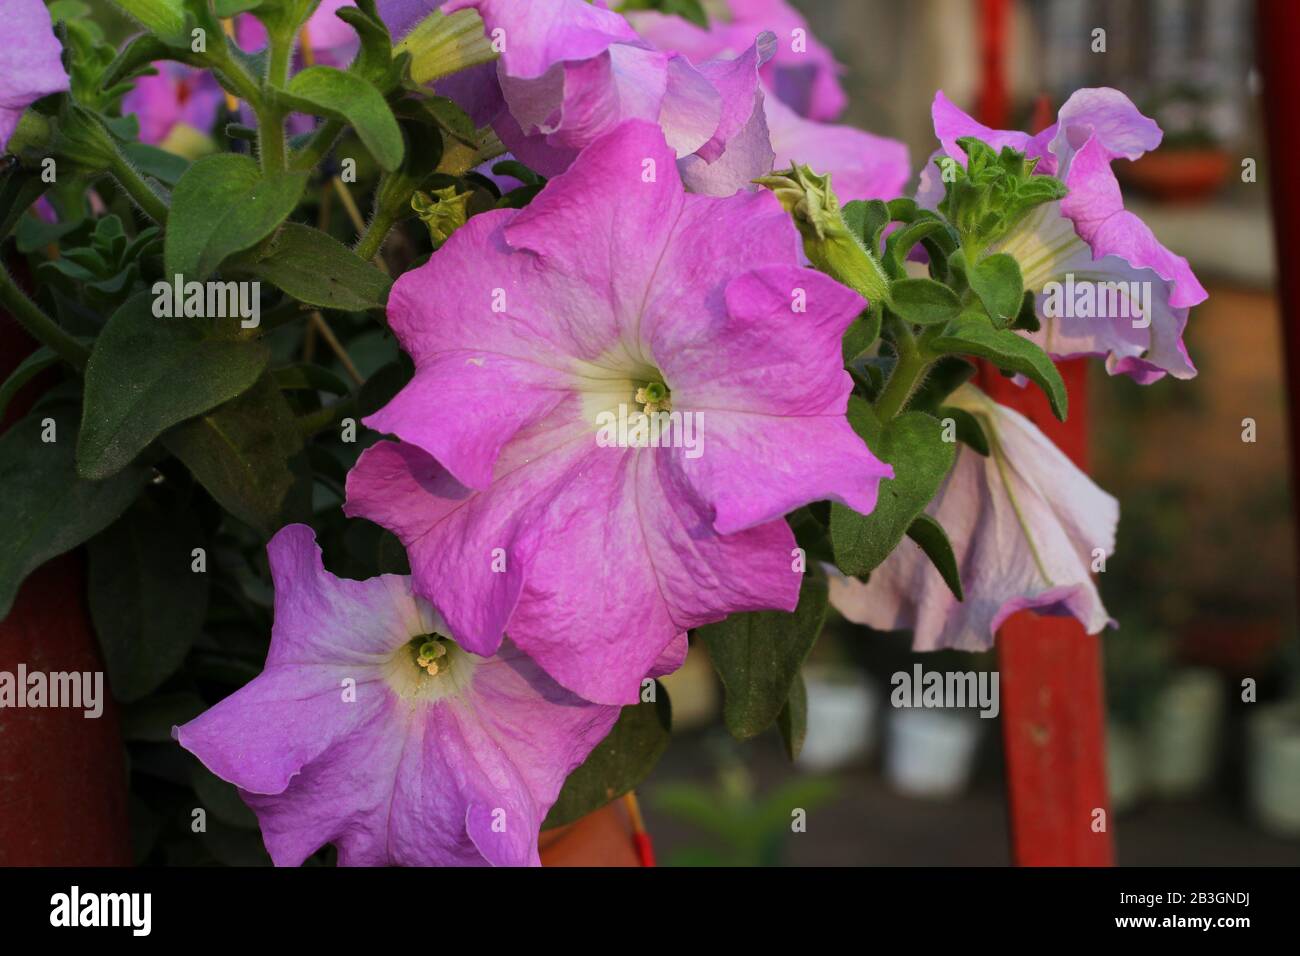 Pink pitunia flowers image under the sun with blur background Stock Photo